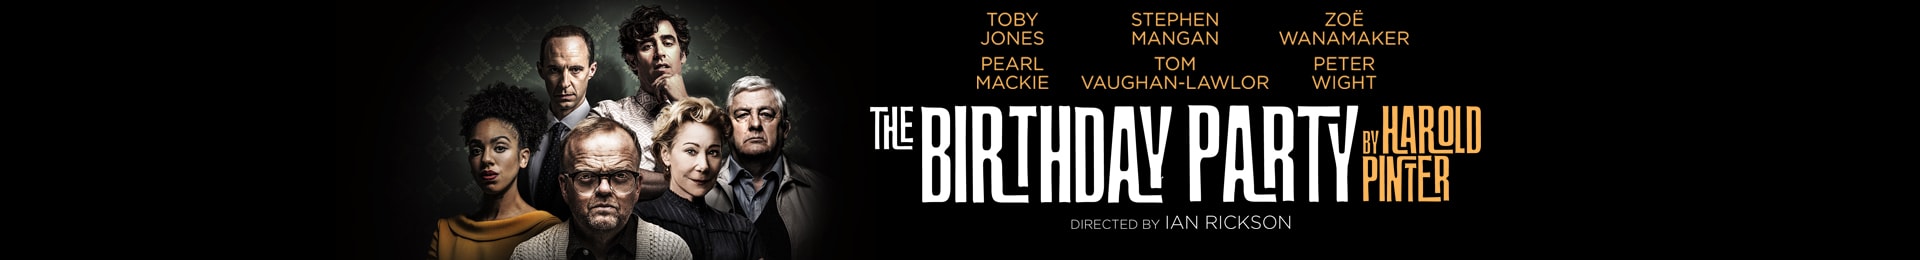 The Birthday Party banner image